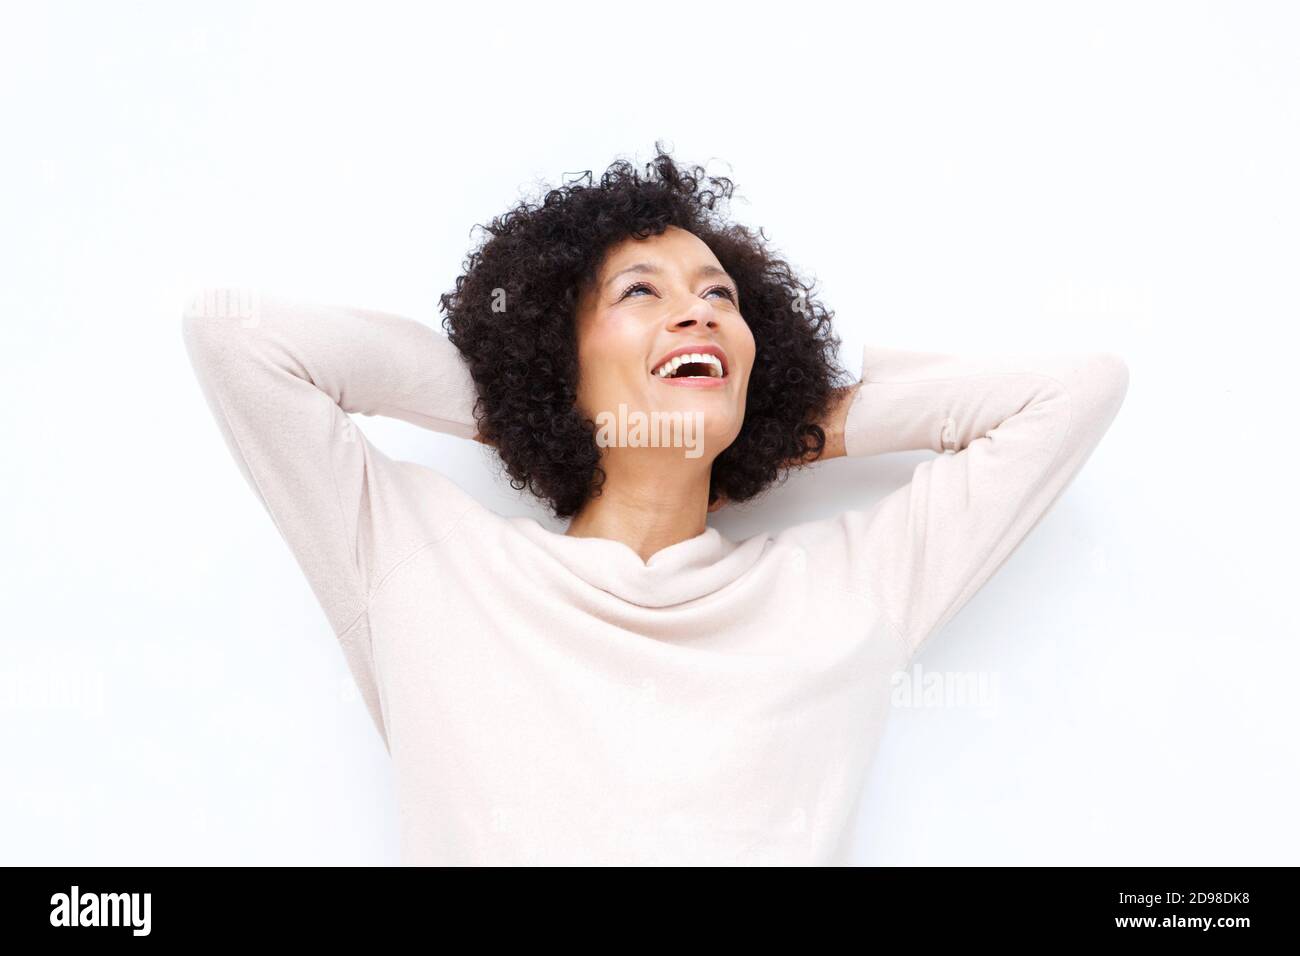 Close up portrait of happy older woman laughing with hands behind head against white backgorund Stock Photo